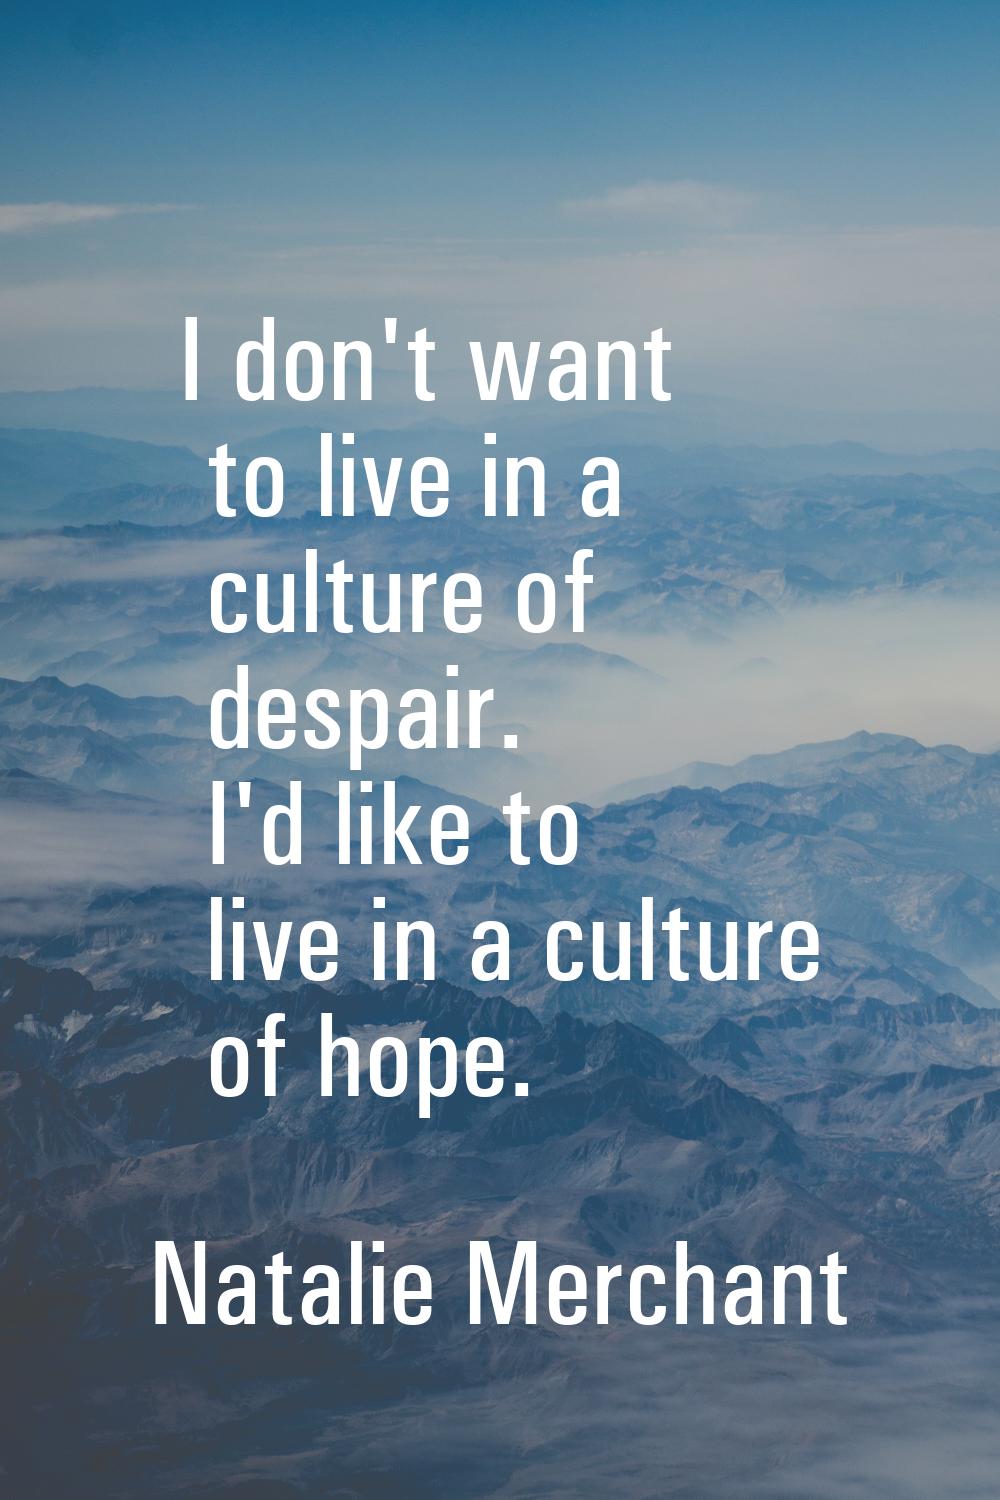 I don't want to live in a culture of despair. I'd like to live in a culture of hope.